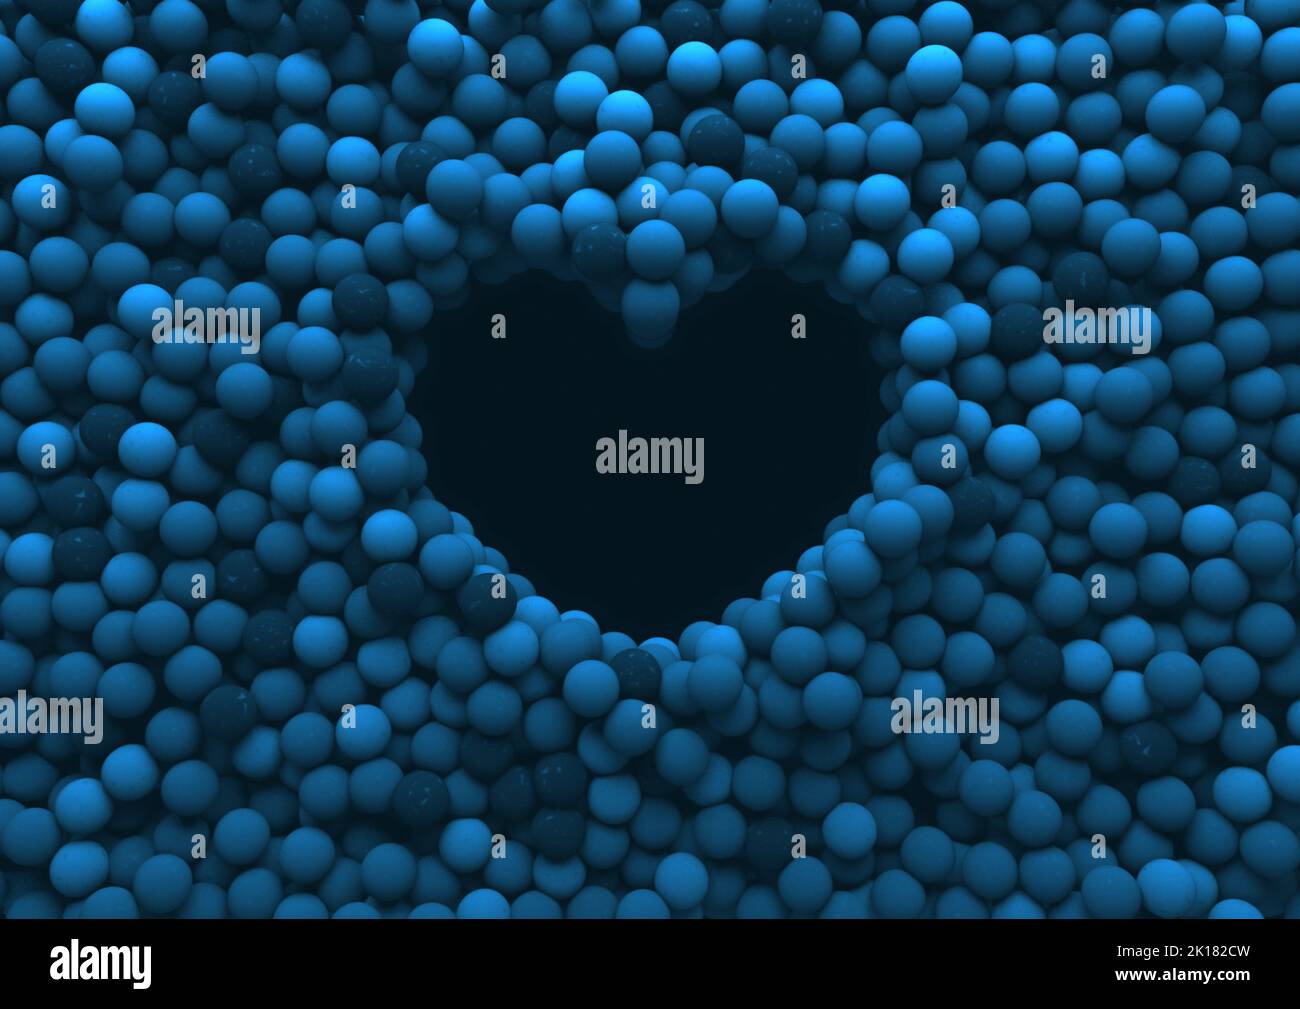 A heart shaped void surrounded by an array of blue rubber balls spread out to form a solid background - 3D render Stock Photo